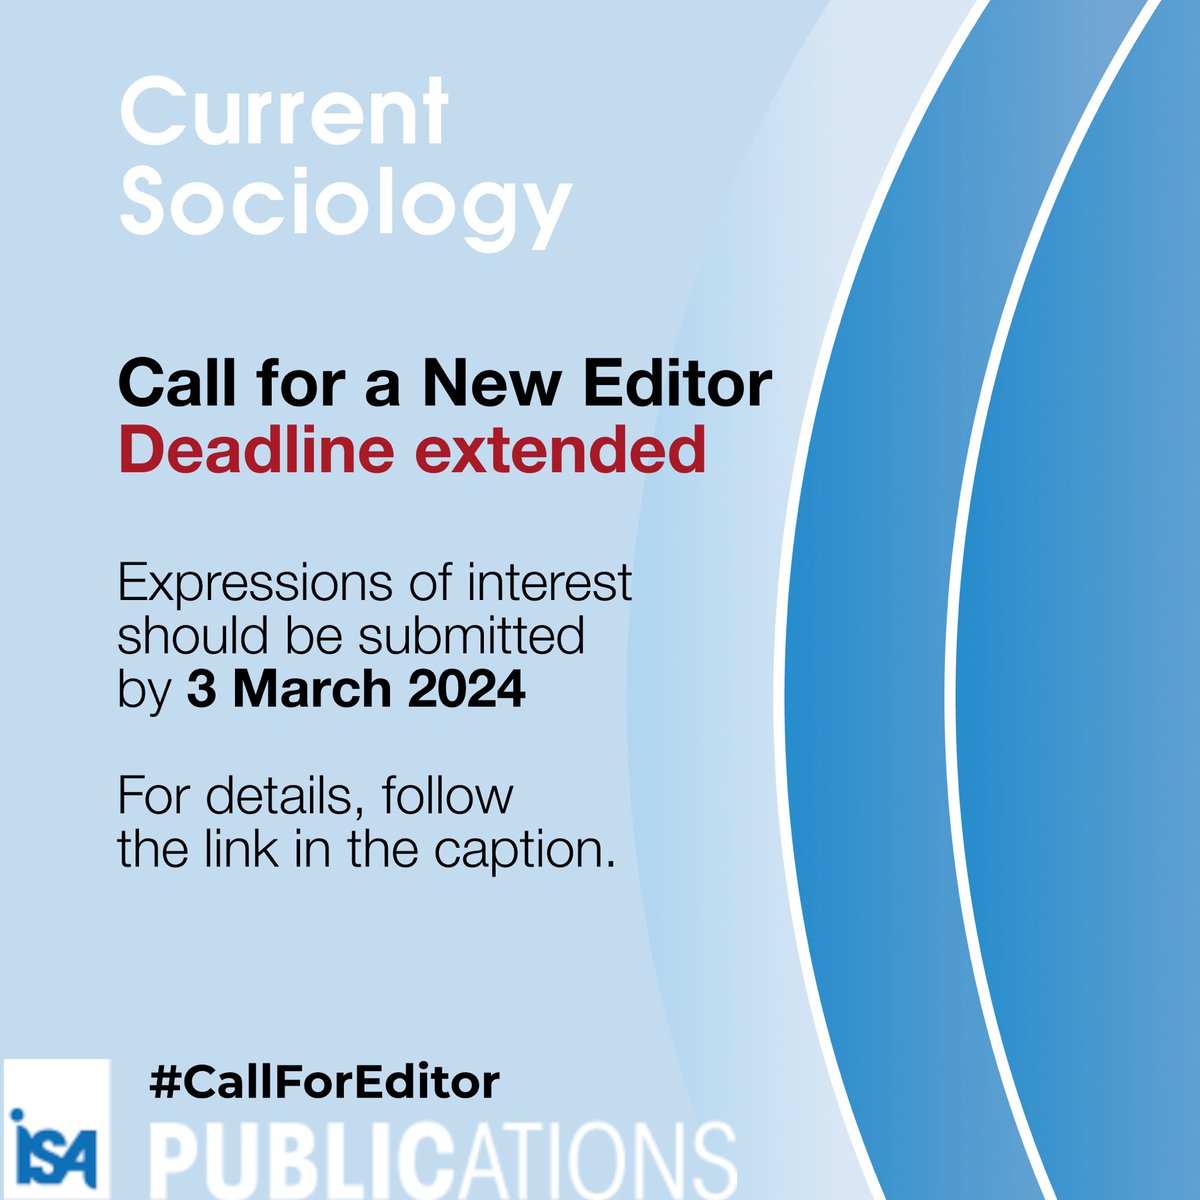 Call for a New Editor 📣 ⏰ Deadline has been extended! The new deadline is March 3rd, 2024. isa-sociology.org/uploads/imgen/… 🖇